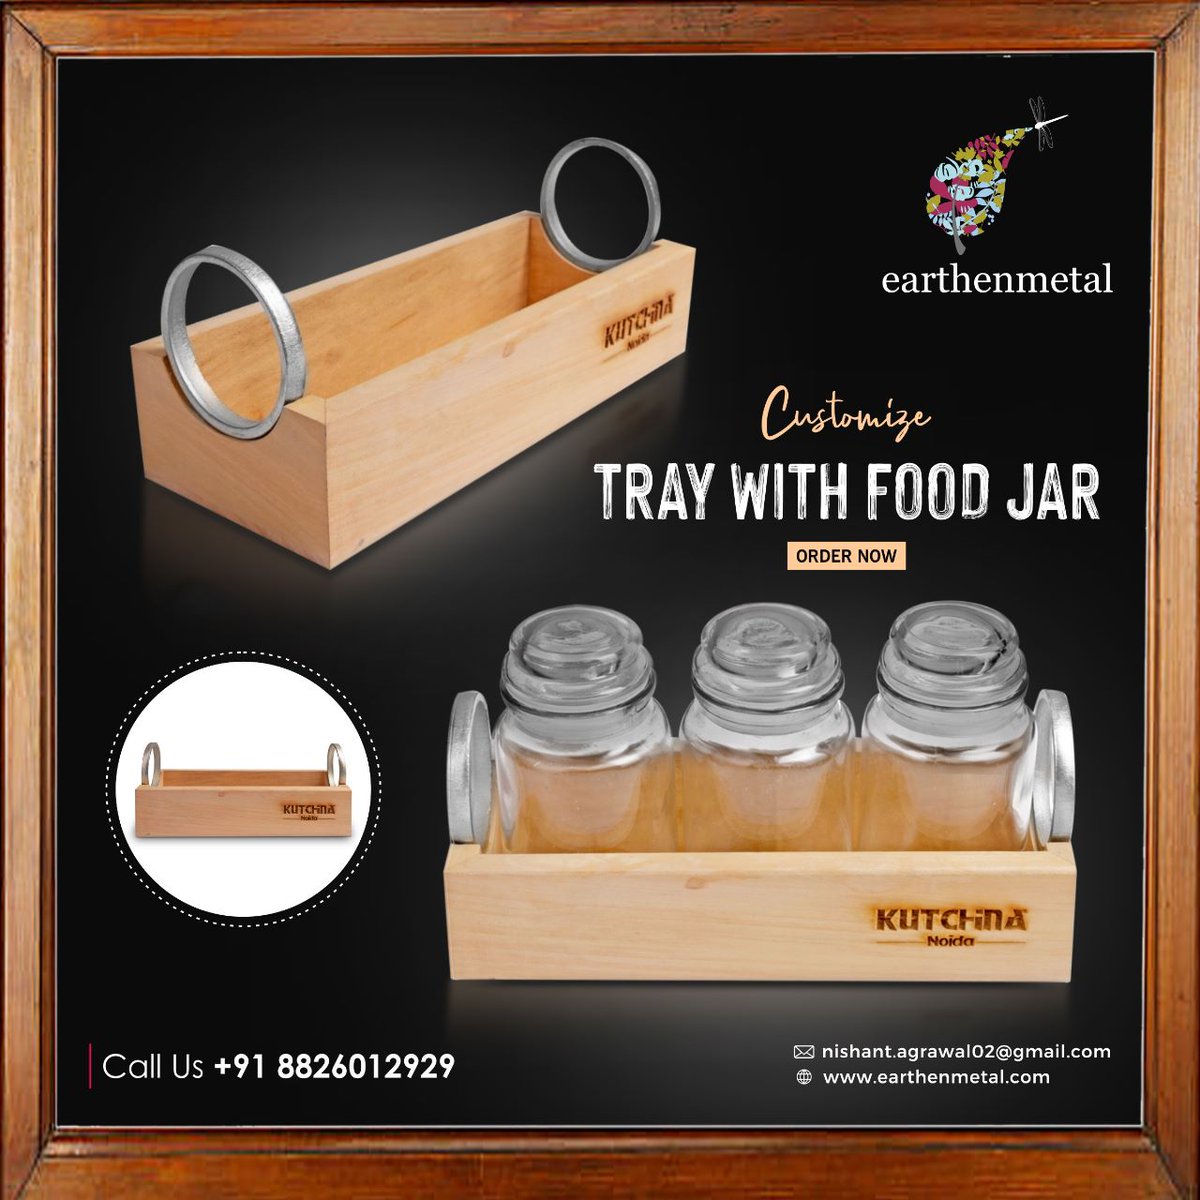 Customised tray with food jar !
SIndulge in personalized dining experiences with a custom tray and food jar set.#earthenmental #WoodenTrays #WoodenTrays #ServingTrays #DecorTrays #WoodenDecor #HomeDecor #Entertaining #HostingEssentials #KitchenEssentials #WoodenDesign